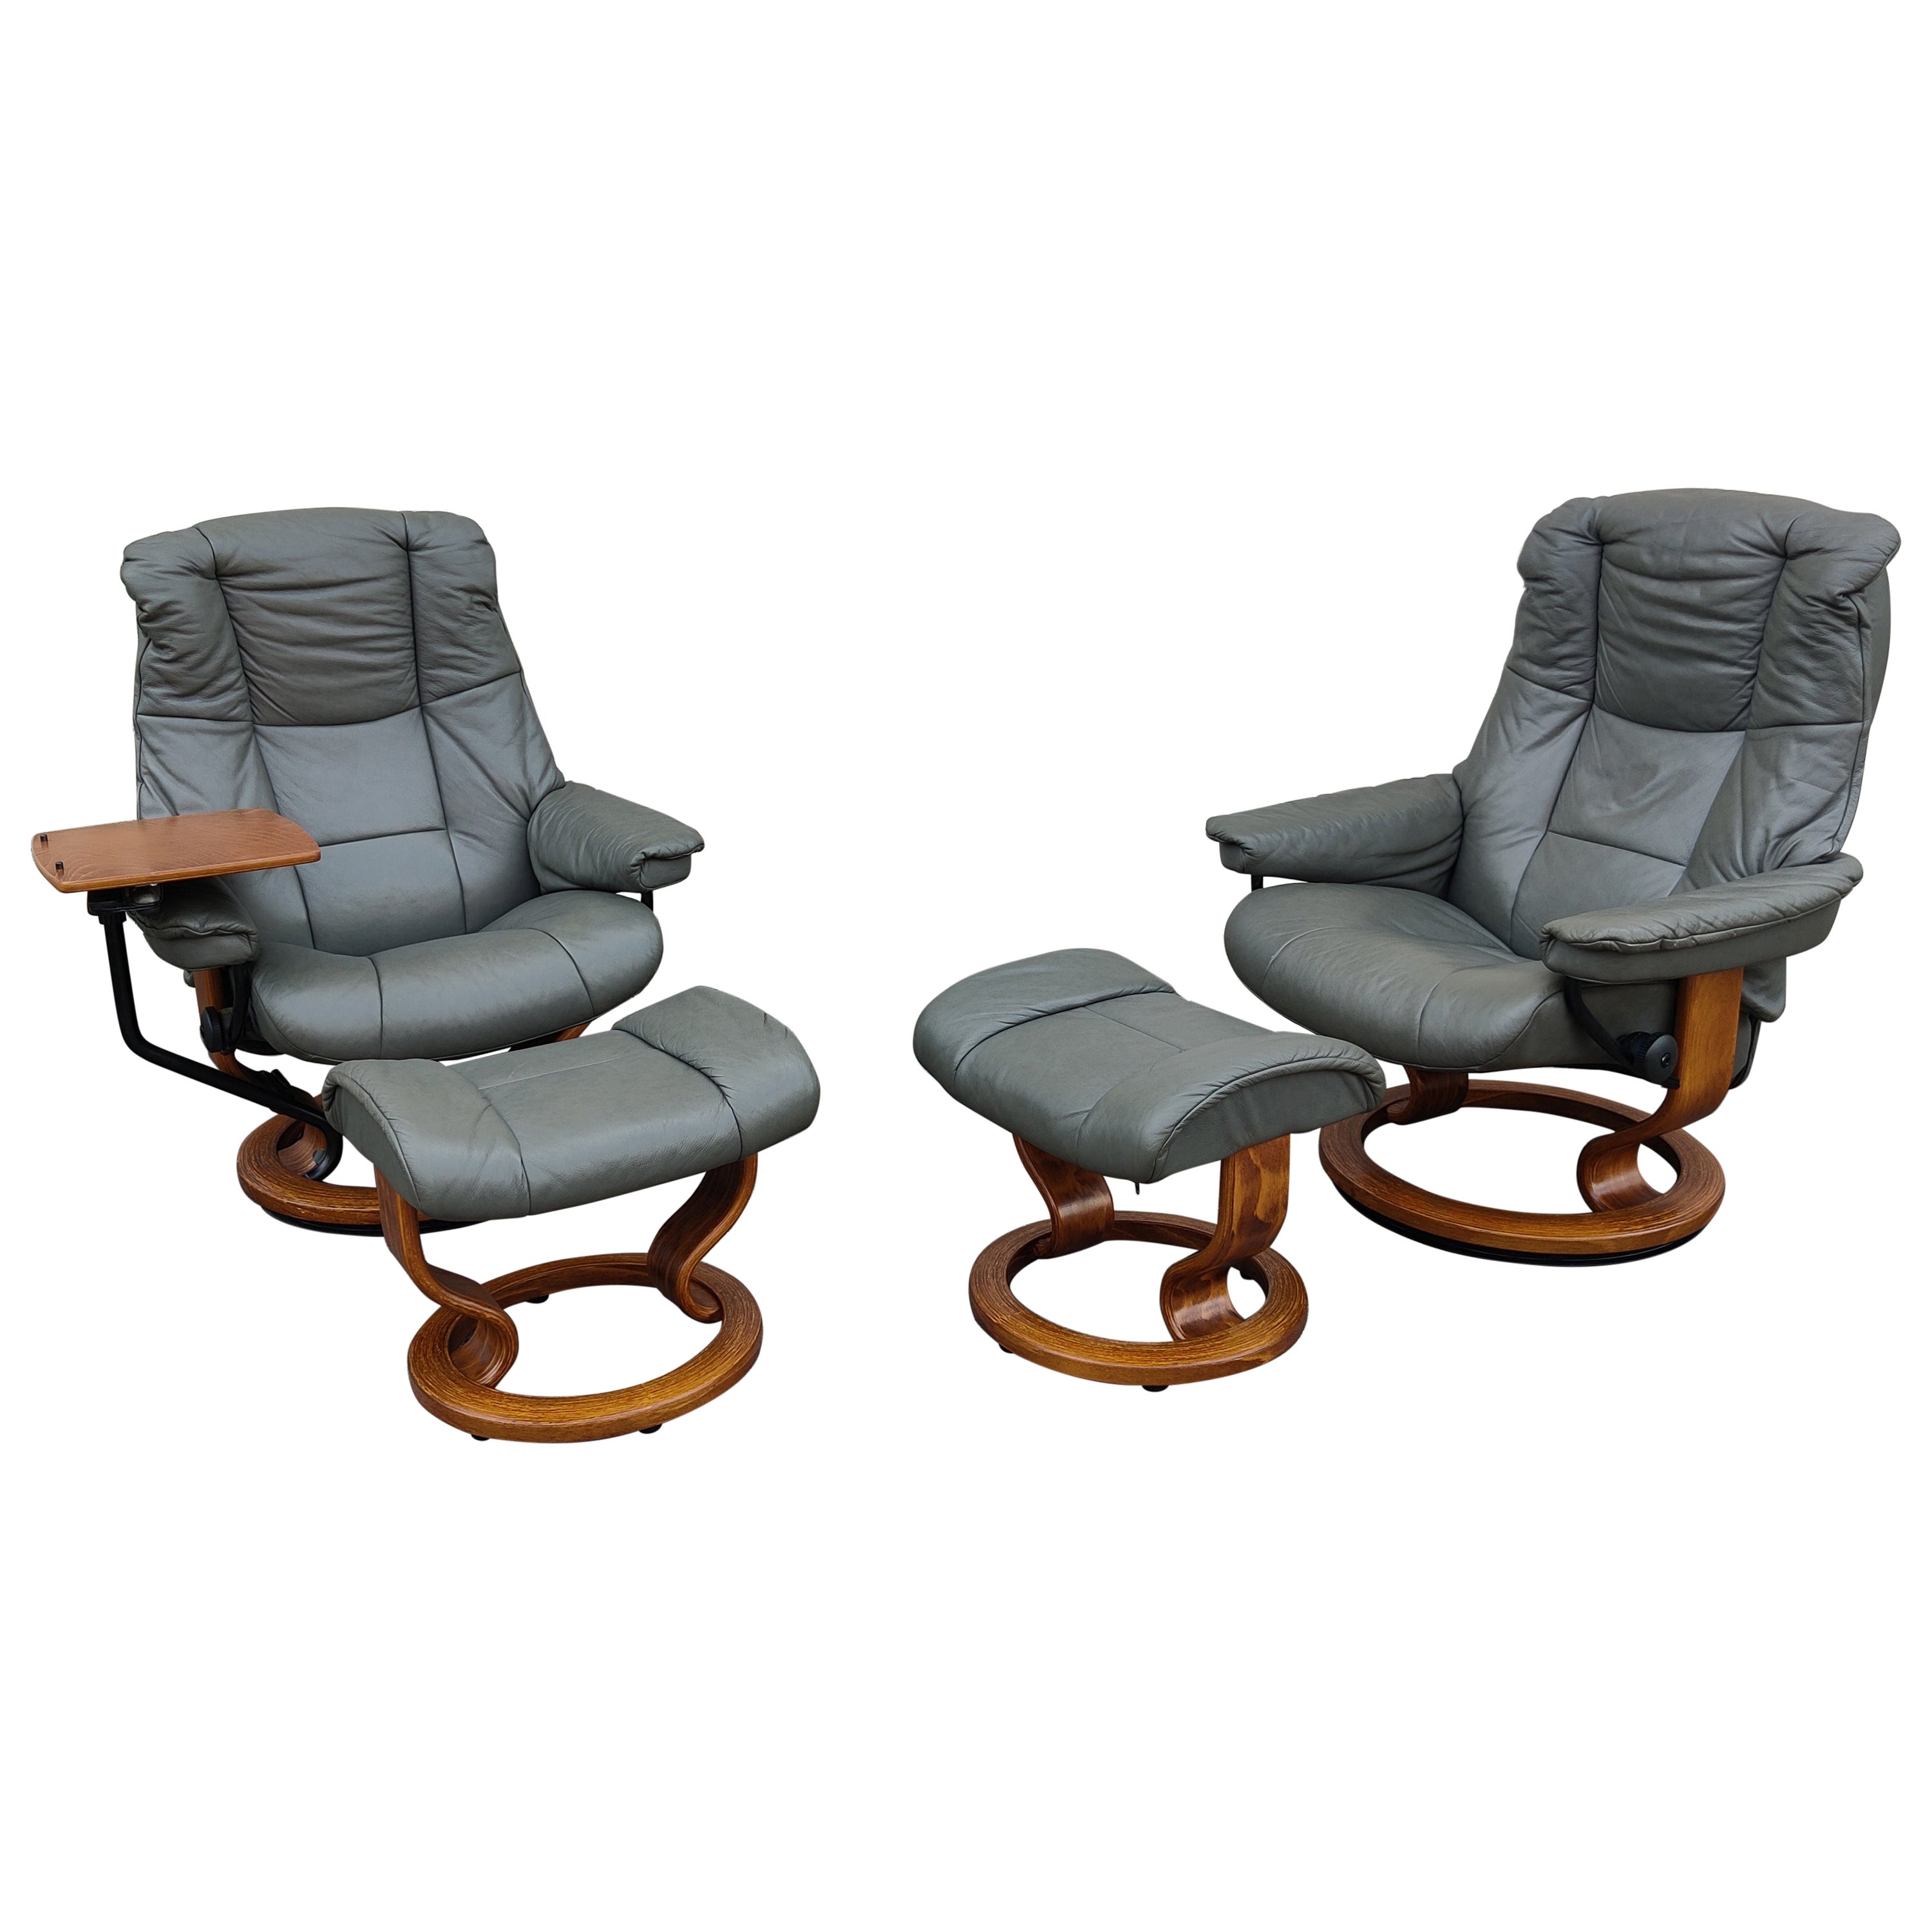 Pair Ekornes Stressless Adjustable Slate Leather Recliners Tray Table + Ottomans For Sale